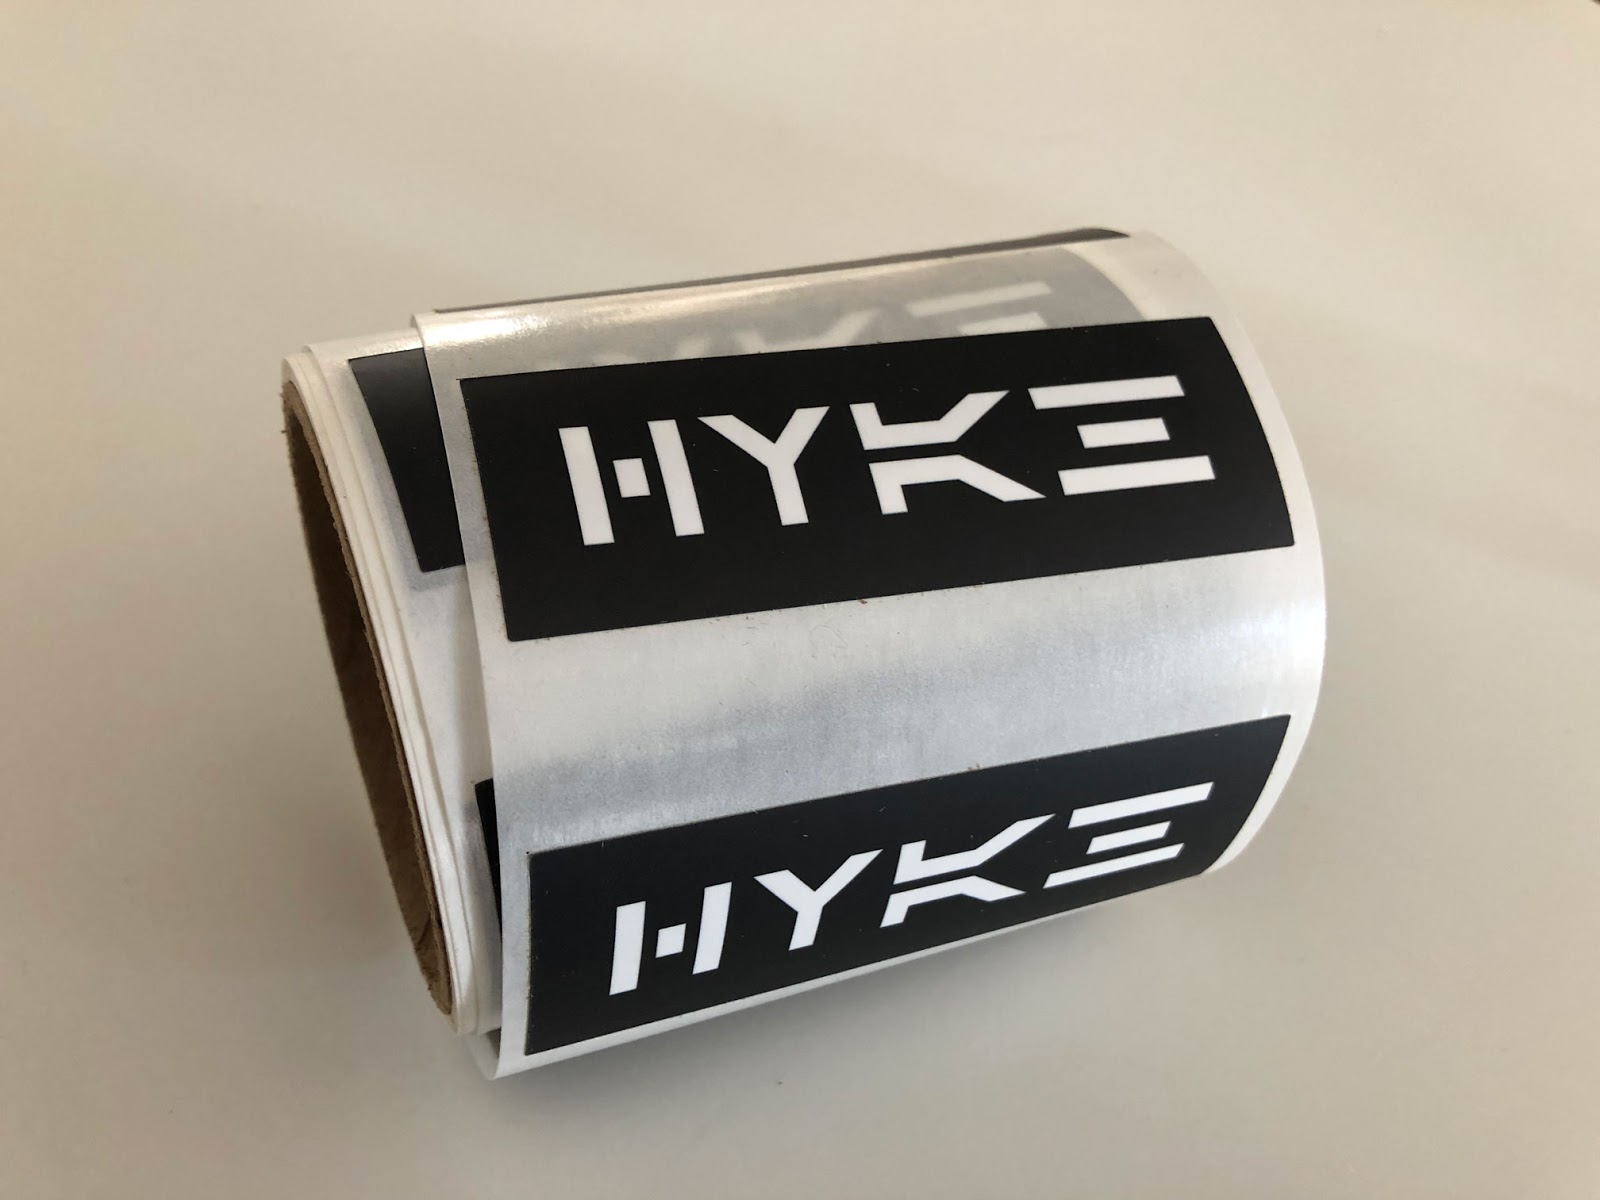 Picture showing HYKE sticker